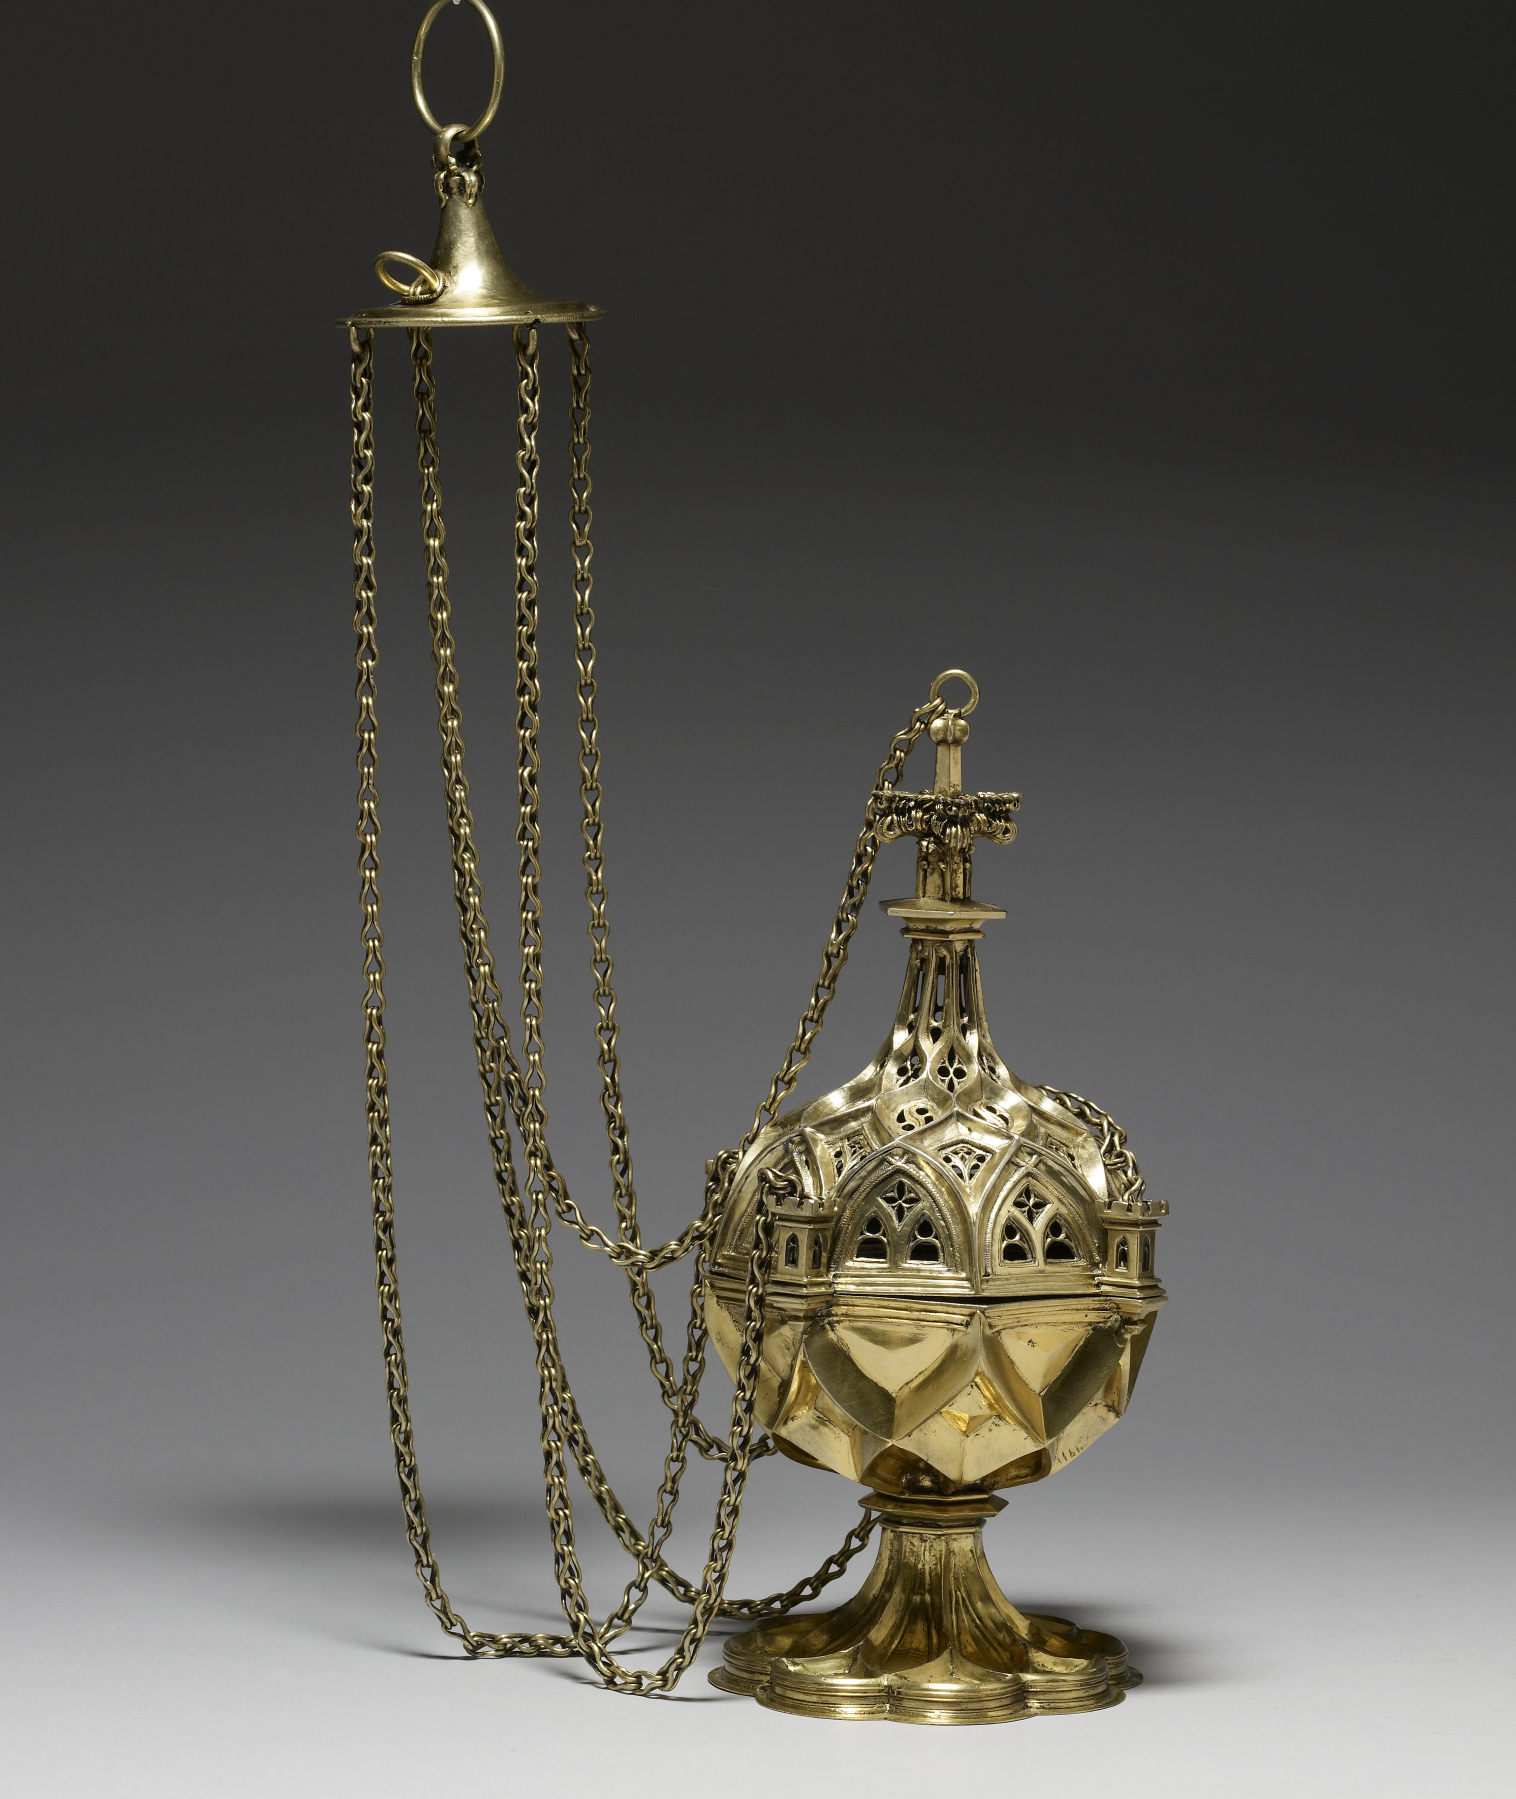 This censer made in Germany is typical of the style popular in western Europe at the end of the fifteenth century. The intersecting raised bands mimic the complex vaulting systems used in late Gothic churches, and the openwork areas are reminiscent of the tracery found in the windows of these buildings.